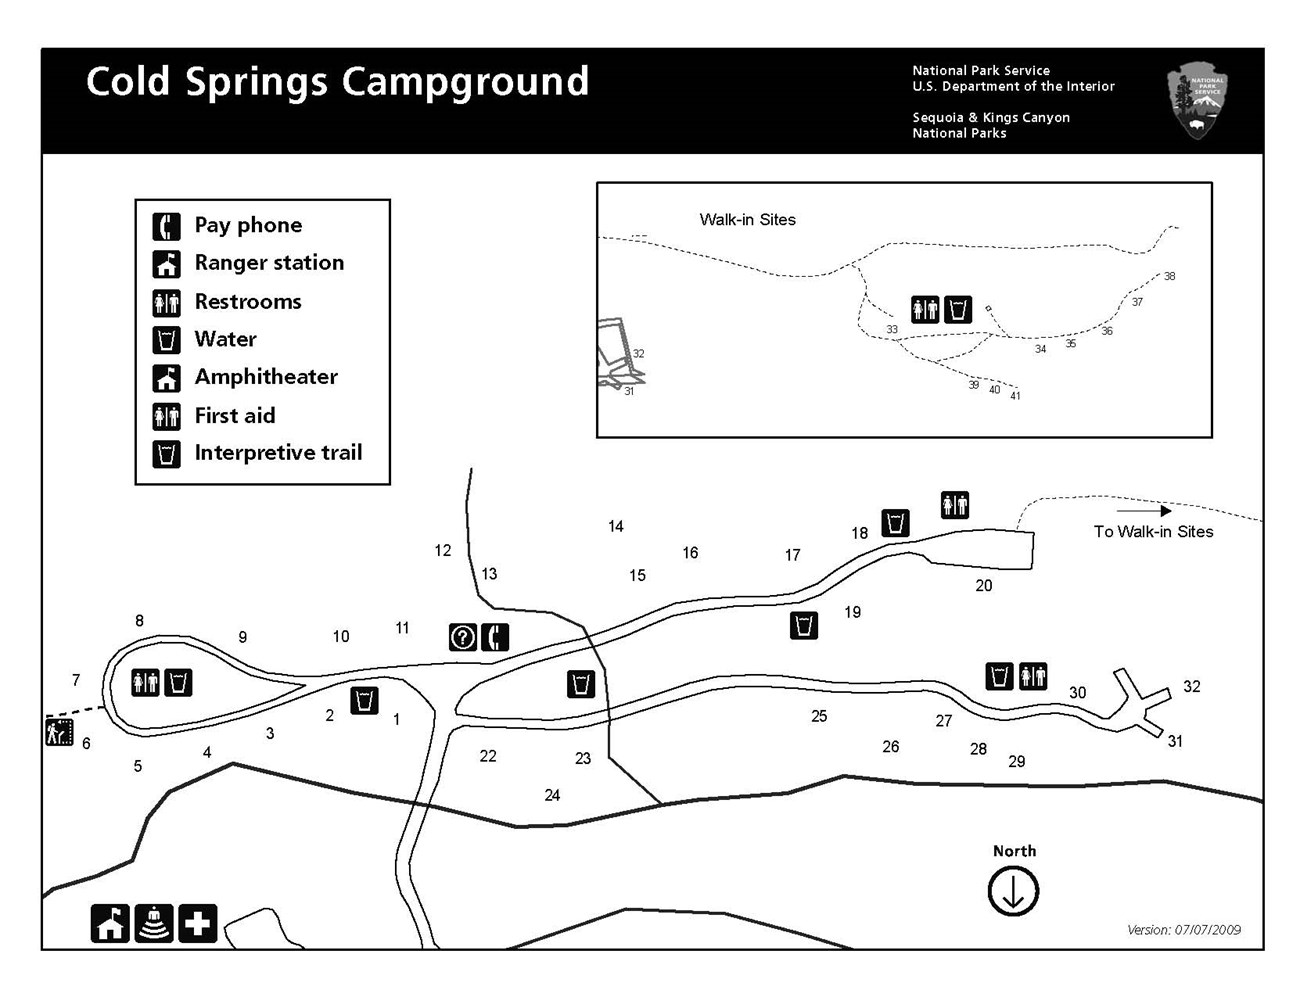 Cold Springs Campground map, Sequoia National Park.